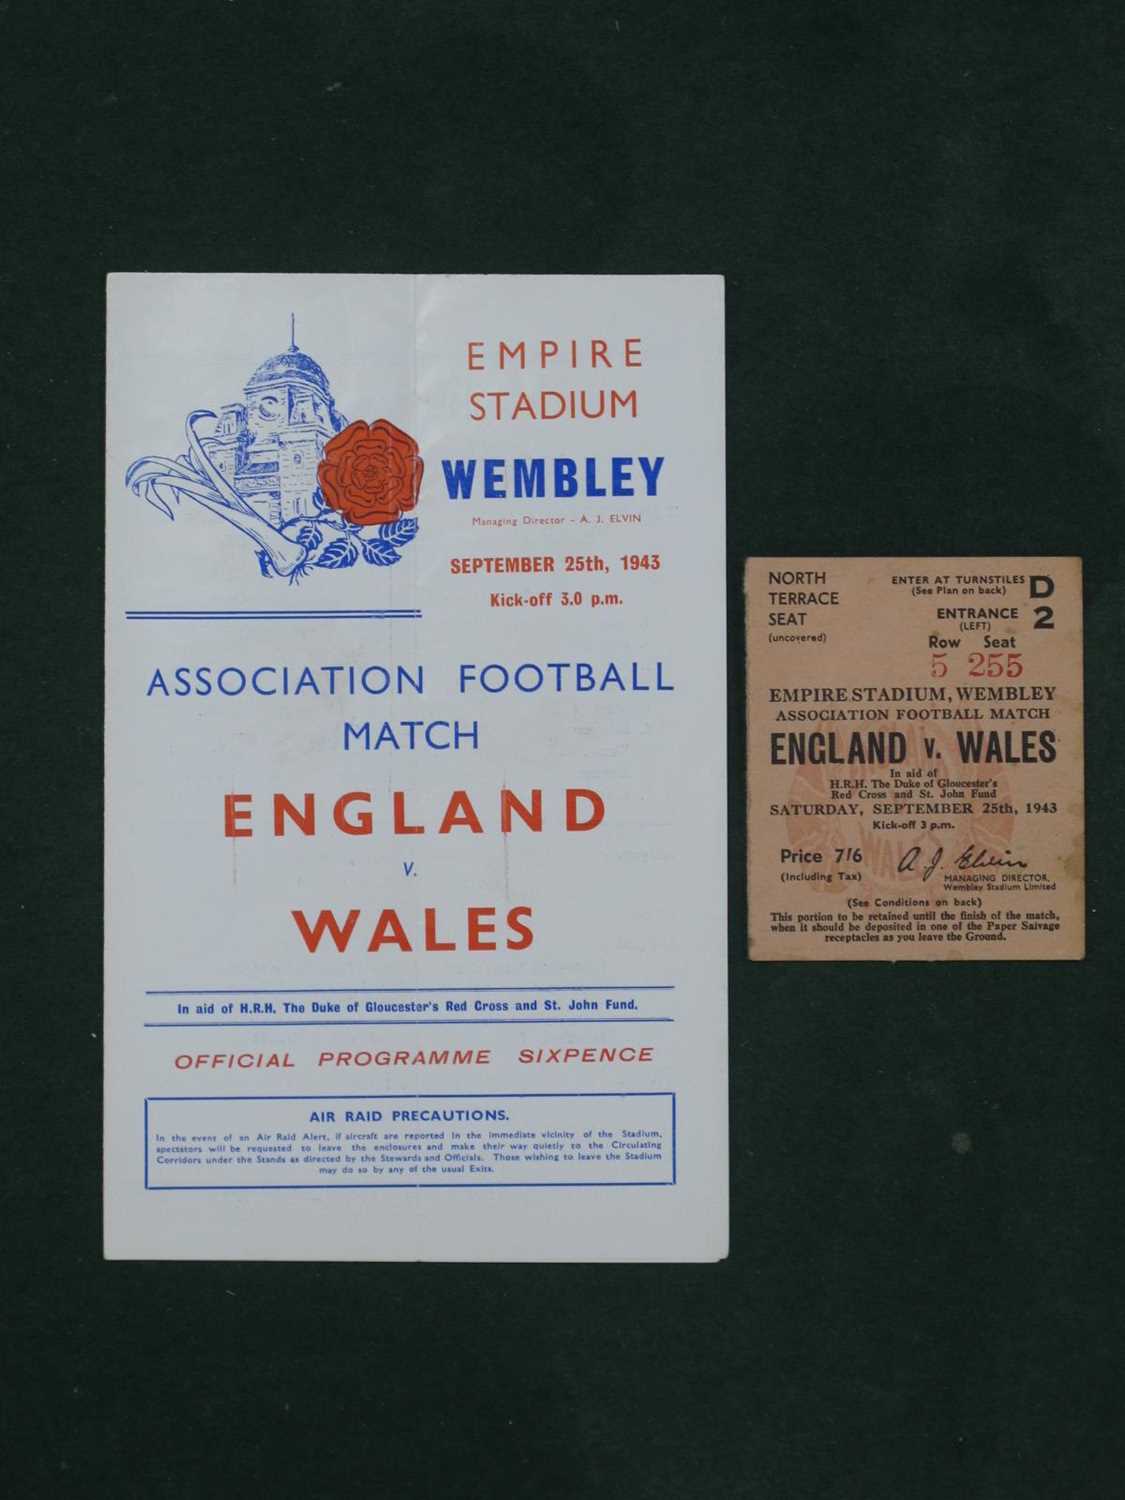 1943 England v. Wales football ticket and programme (vertical crease), at Wembley, dated 25th